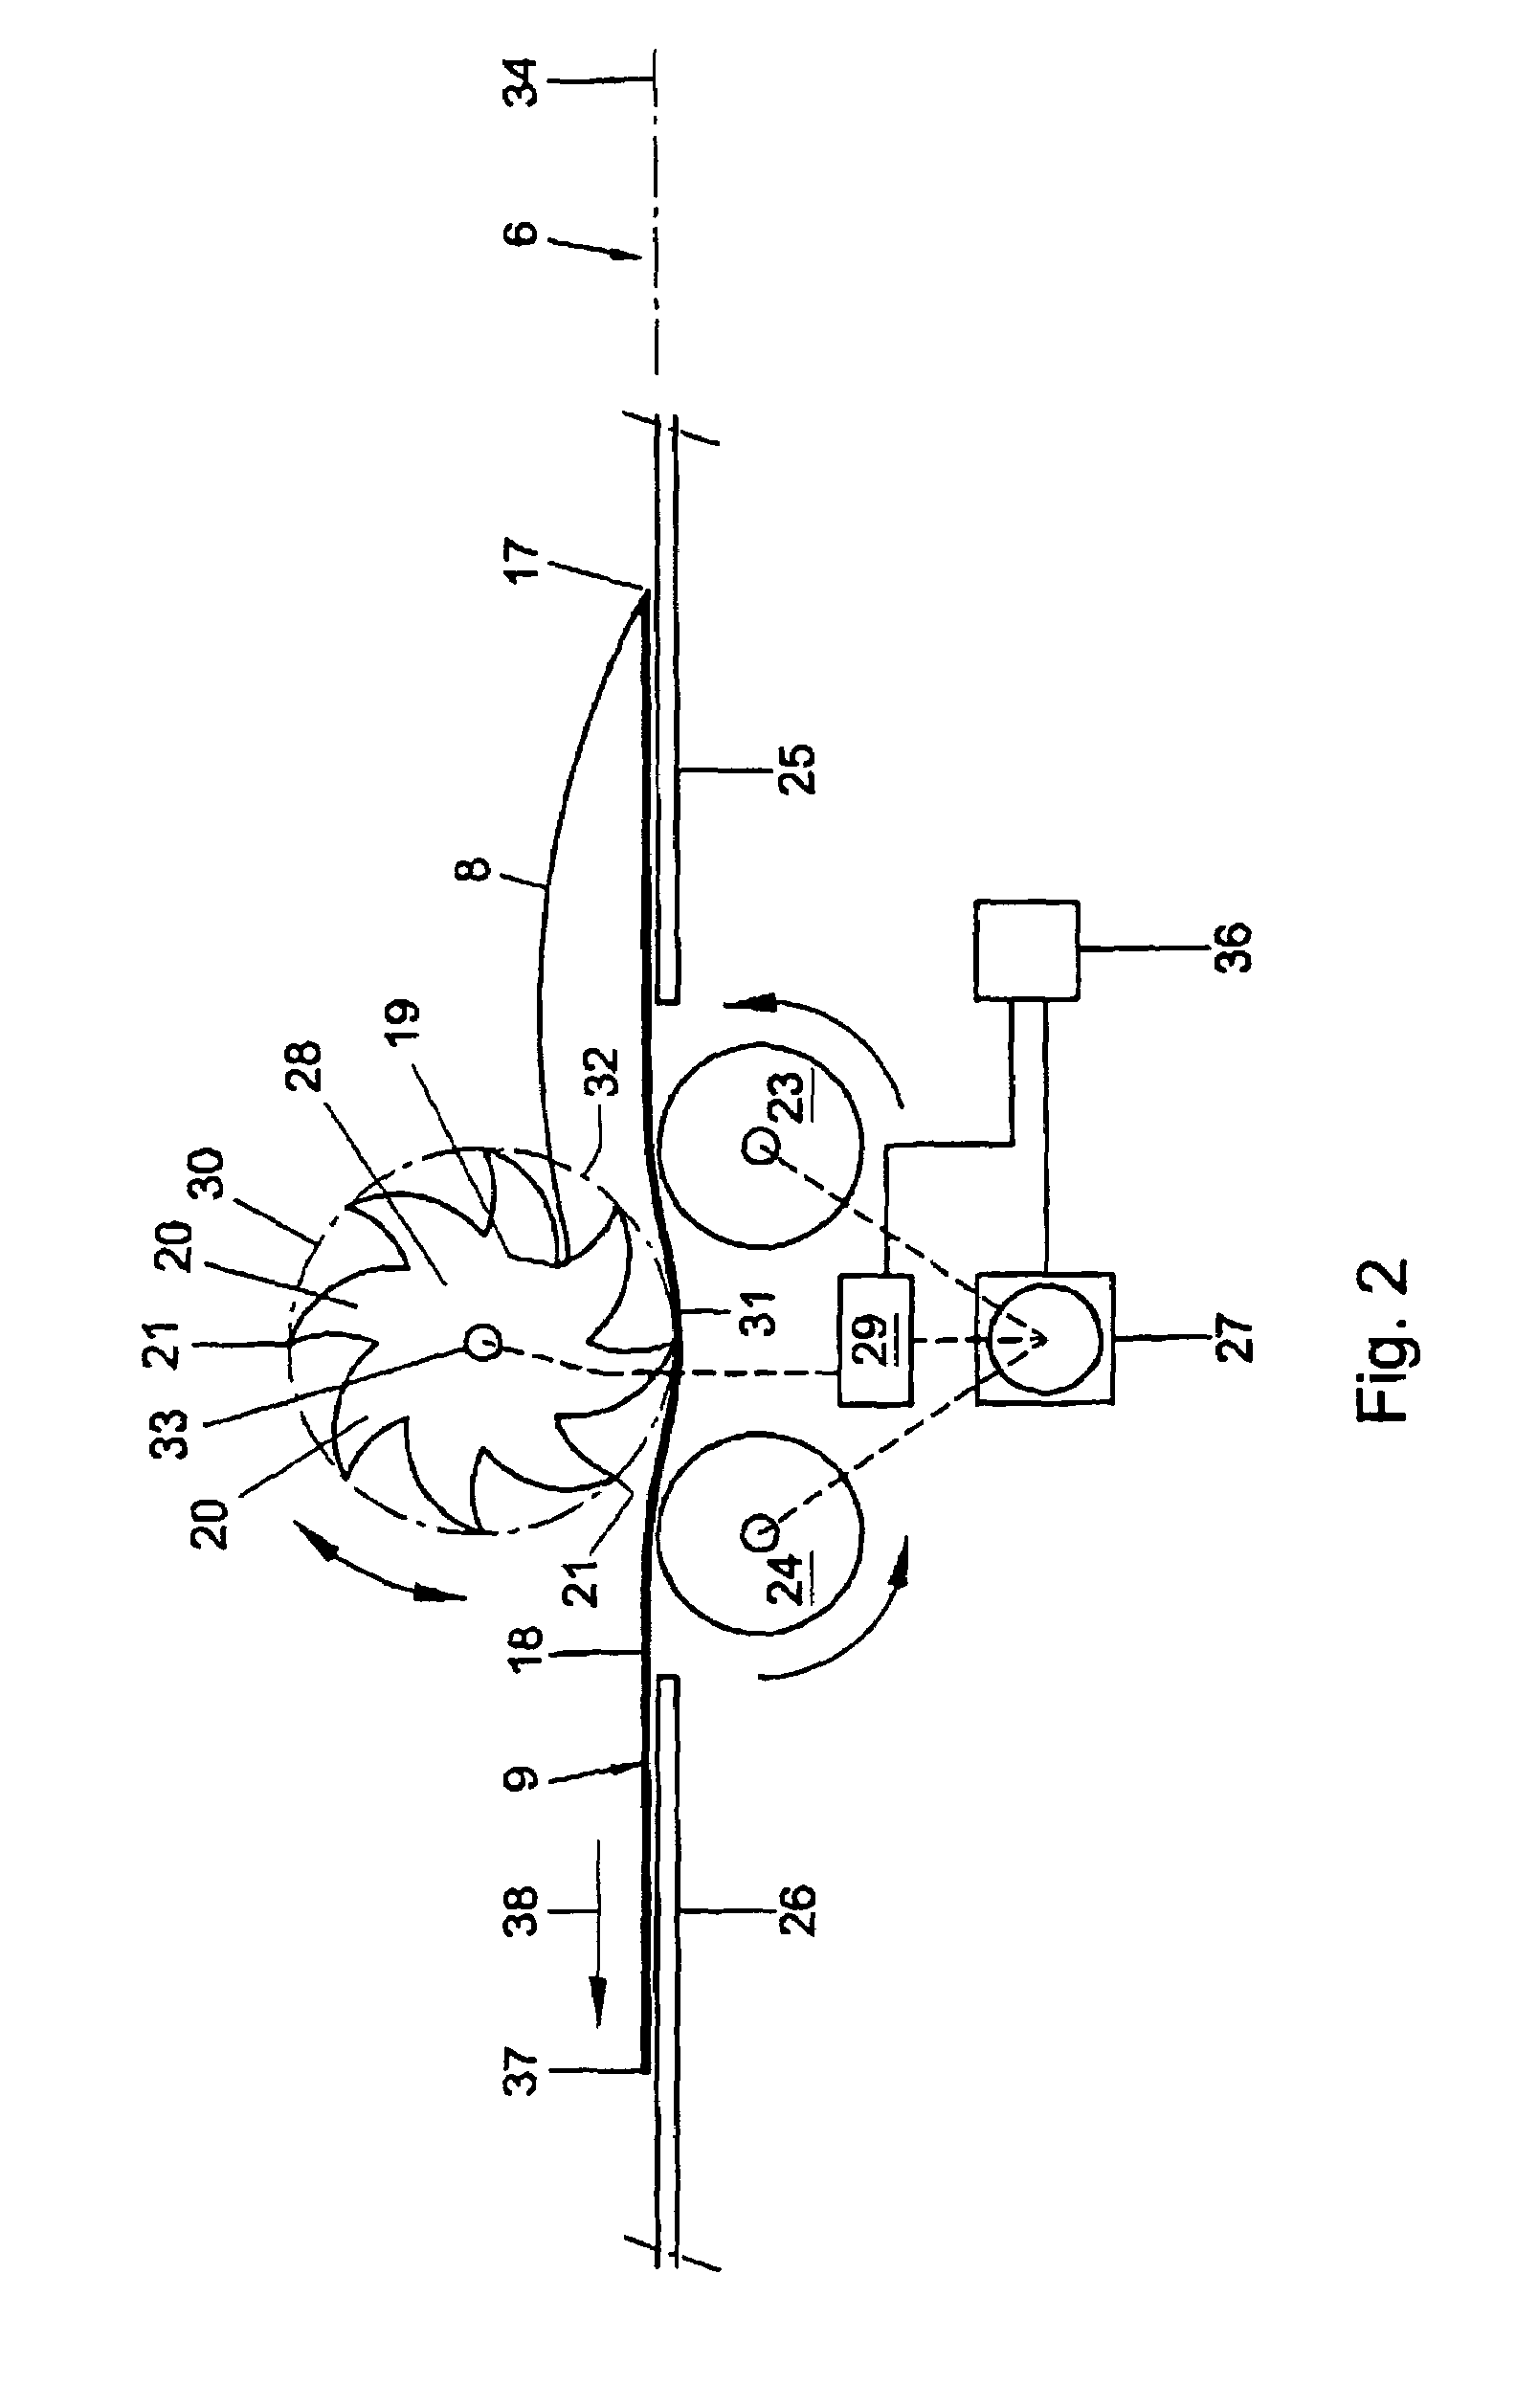 Machine and method for inserting sheets into envelopes